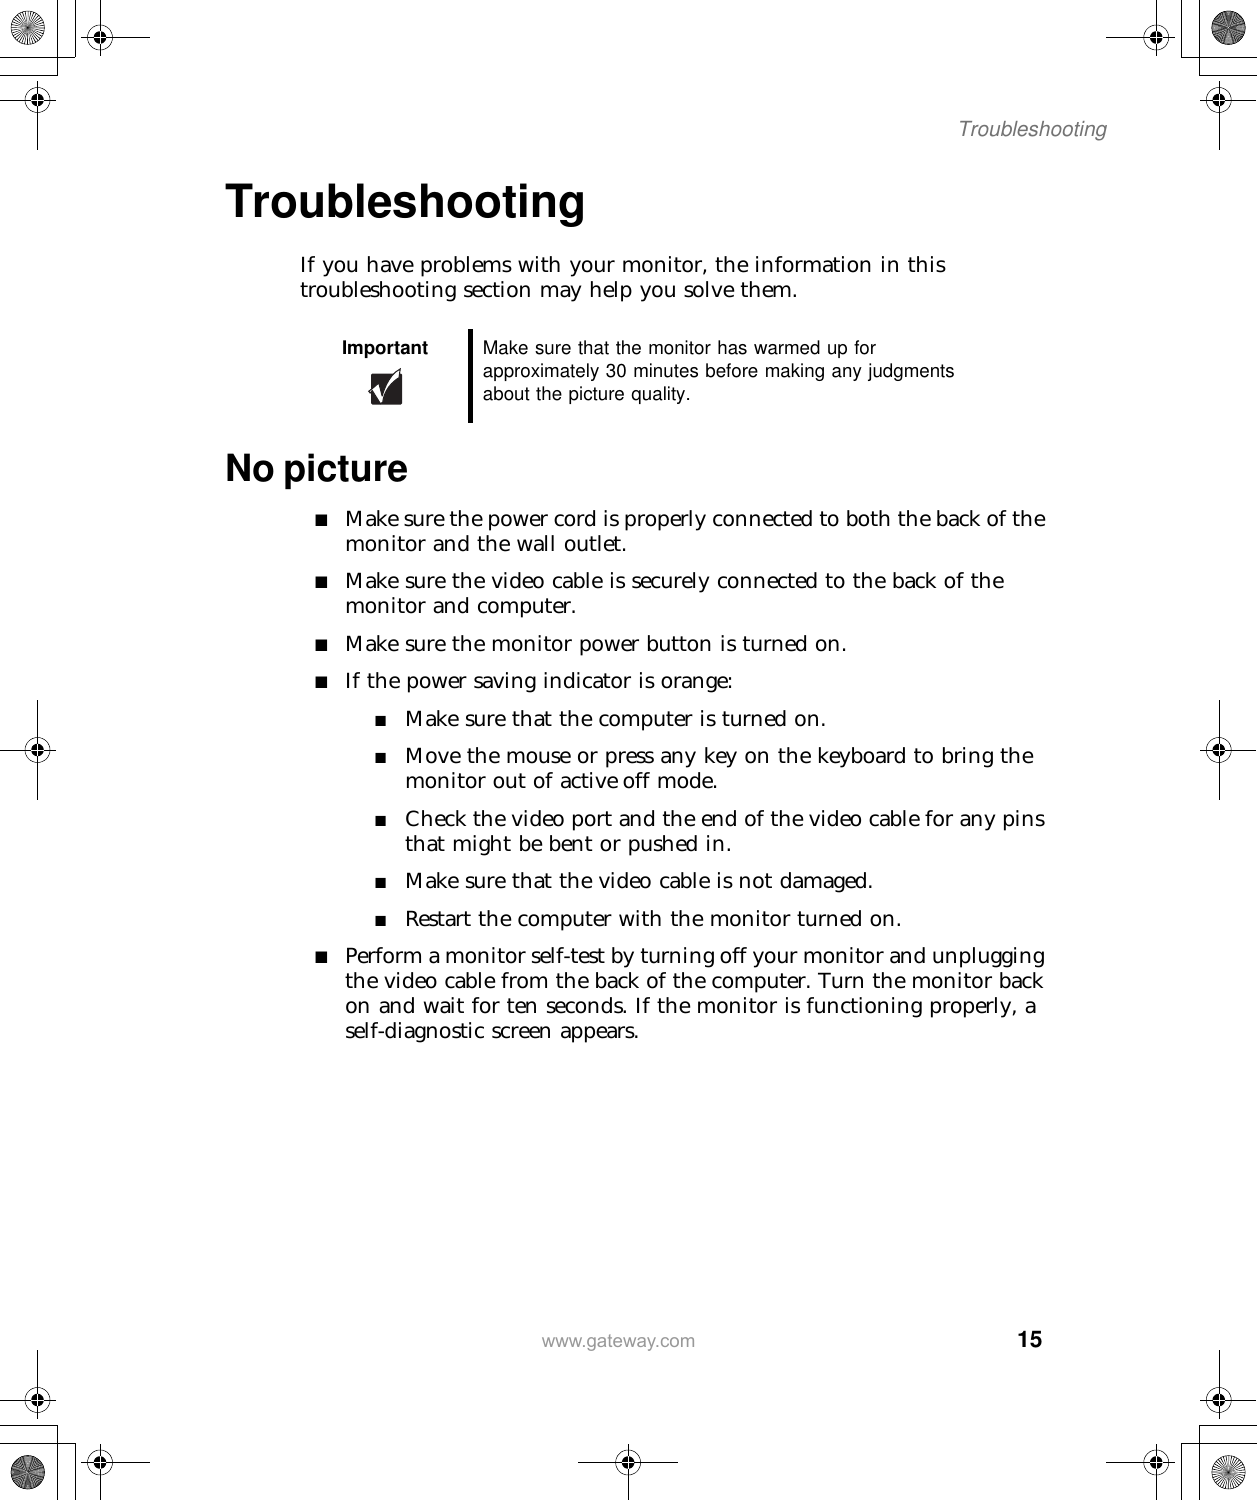   15Troubleshootingwww.gateway.comTroubleshootingIf you have problems with your monitor, the information in this troubleshooting section may help you solve them.No picture■Make sure the power cord is properly connected to both the back of the monitor and the wall outlet.■Make sure the video cable is securely connected to the back of the monitor and computer.■Make sure the monitor power button is turned on.■If the power saving indicator is orange:■Make sure that the computer is turned on.■Move the mouse or press any key on the keyboard to bring the monitor out of active off mode.■Check the video port and the end of the video cable for any pins that might be bent or pushed in.■Make sure that the video cable is not damaged.■Restart the computer with the monitor turned on.■Perform a monitor self-test by turning off your monitor and unplugging the video cable from the back of the computer. Turn the monitor back on and wait for ten seconds. If the monitor is functioning properly, a self-diagnostic screen appears.Important Make sure that the monitor has warmed up for approximately 30 minutes before making any judgments about the picture quality.